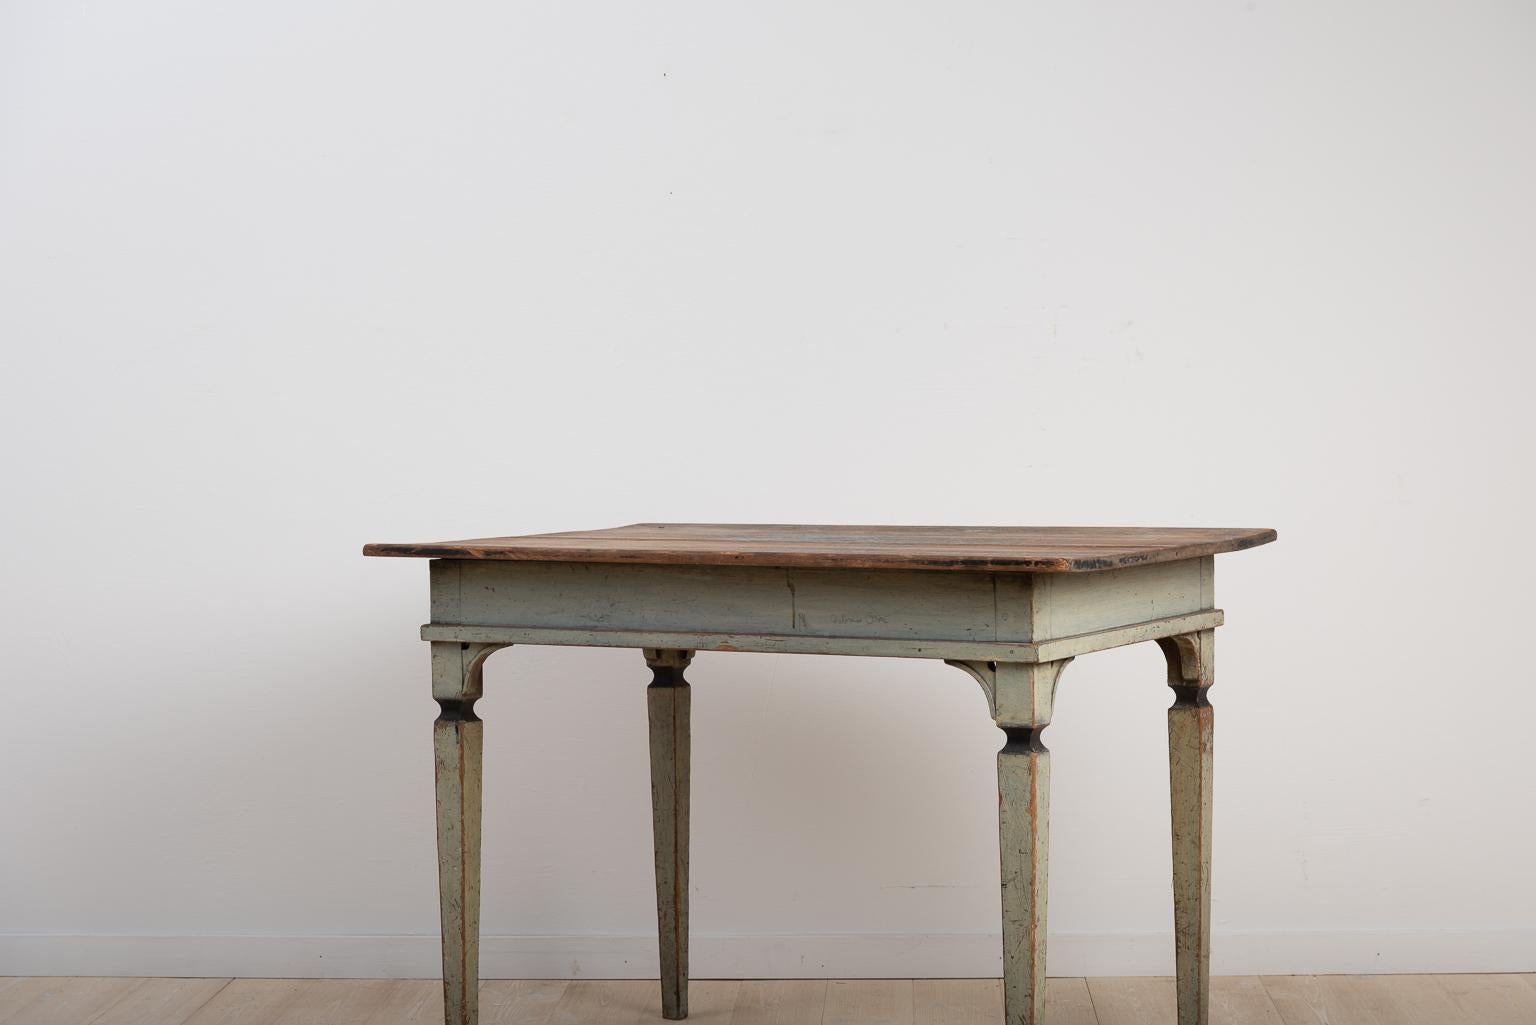 Swedish Gustavian table in untouched condition with original paint from the late 1700. Straight tapered legs with corner consoles that are typical for the Swedish Gustavian period. Manufactured circa 1780-1790.